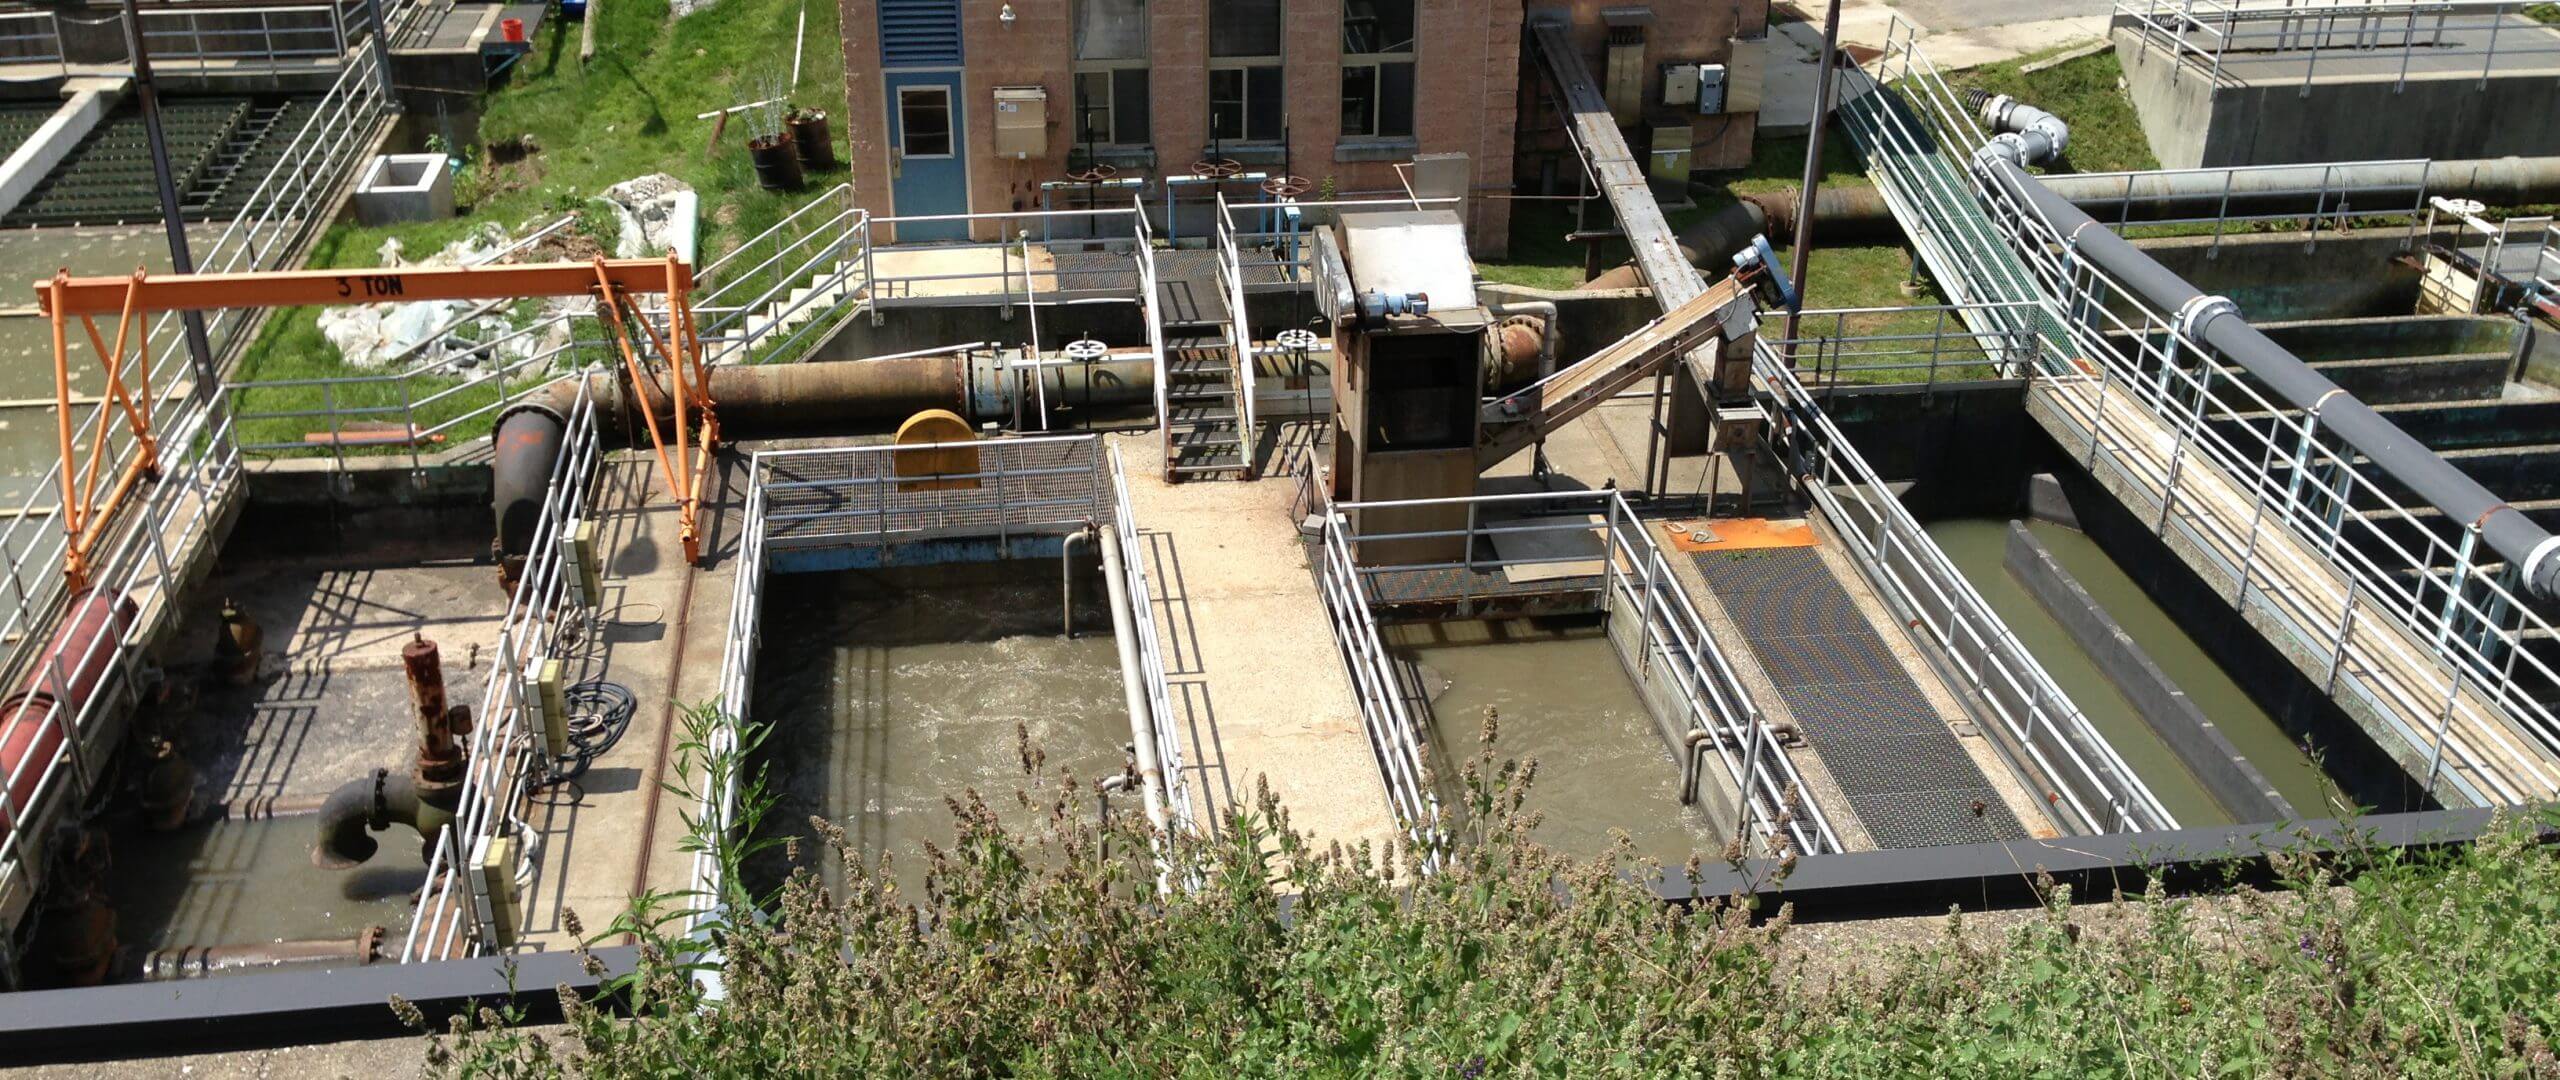 1. client situation johnstown from left lift pump basin aerated tank grit chamber screening bldg in rear 2560x1080